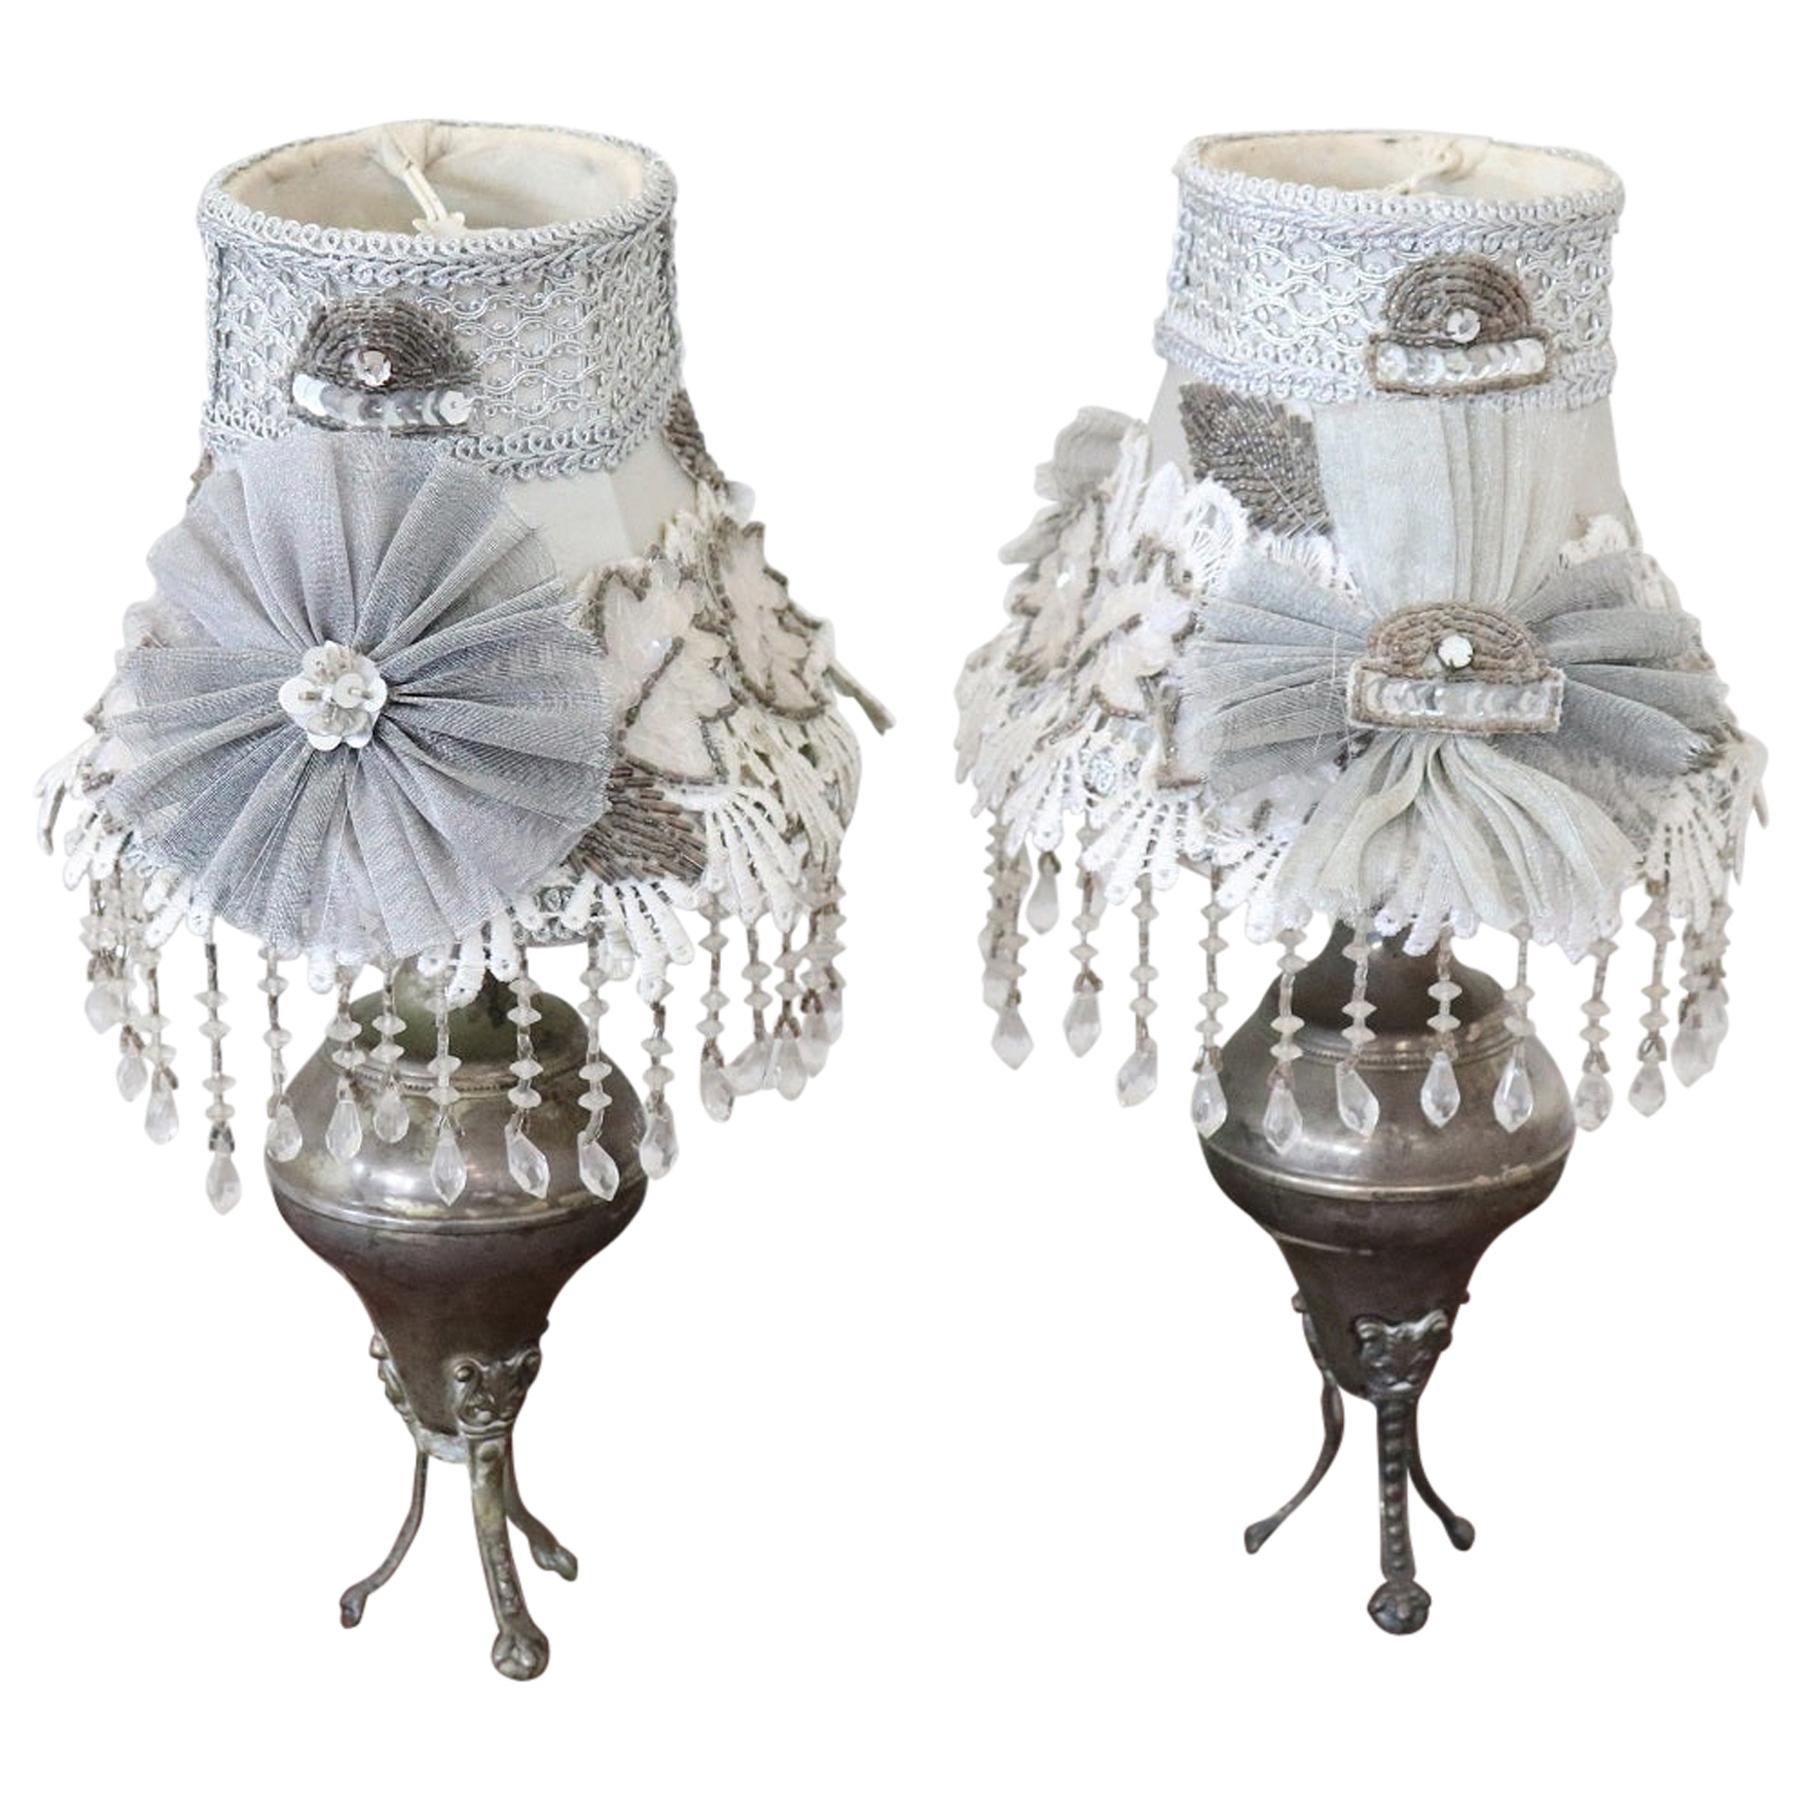 Early 20th Century Italian Silvered Metal Pair of Table Lamp